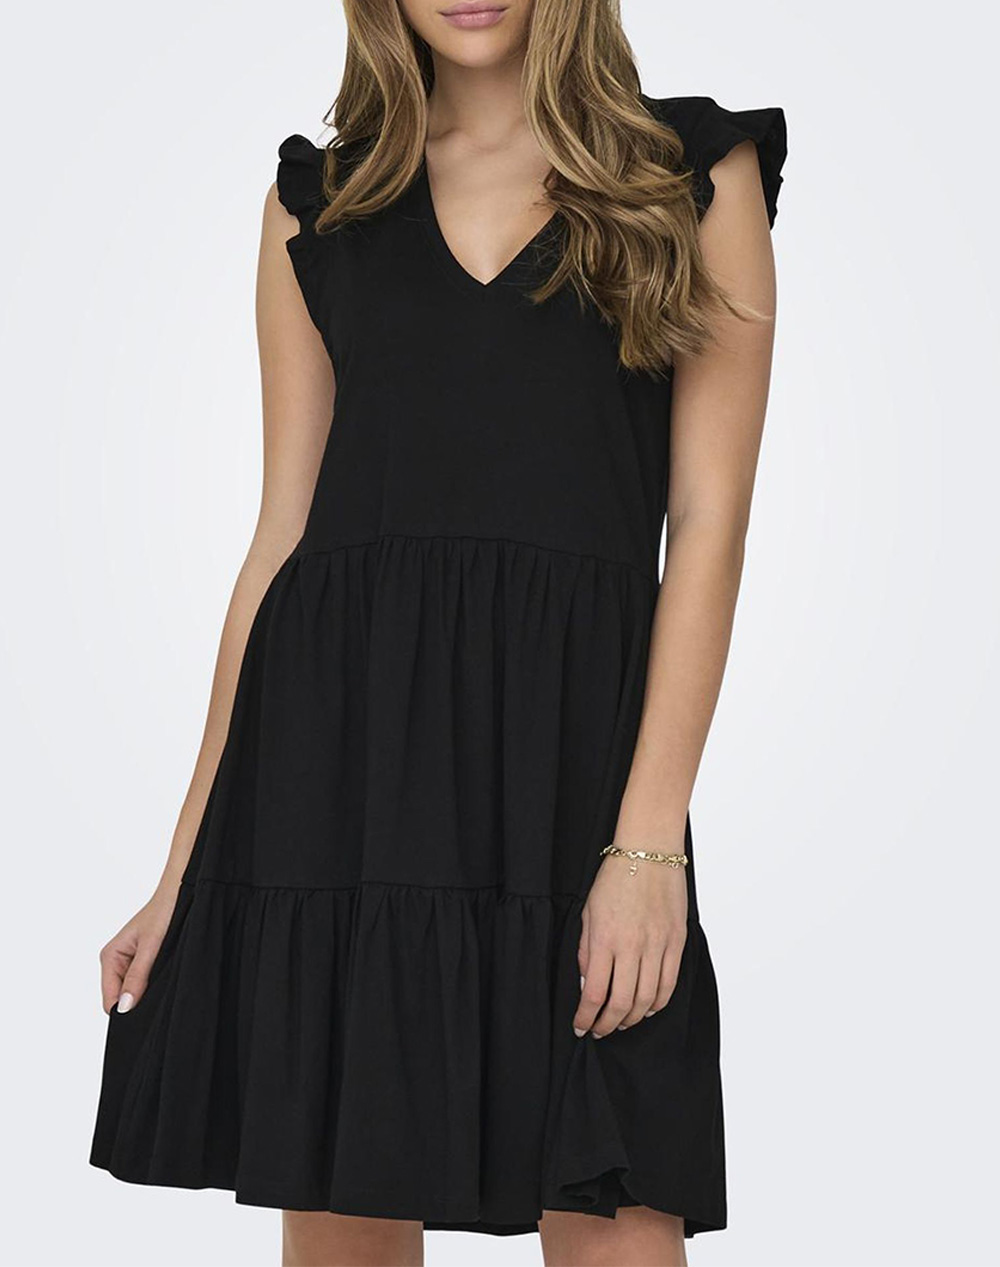 ONLY ONLMAY CAP SLEEV FRIL DRESS JRS NOOS 15226992-BLACK Black 0410AONLY4200192_2813